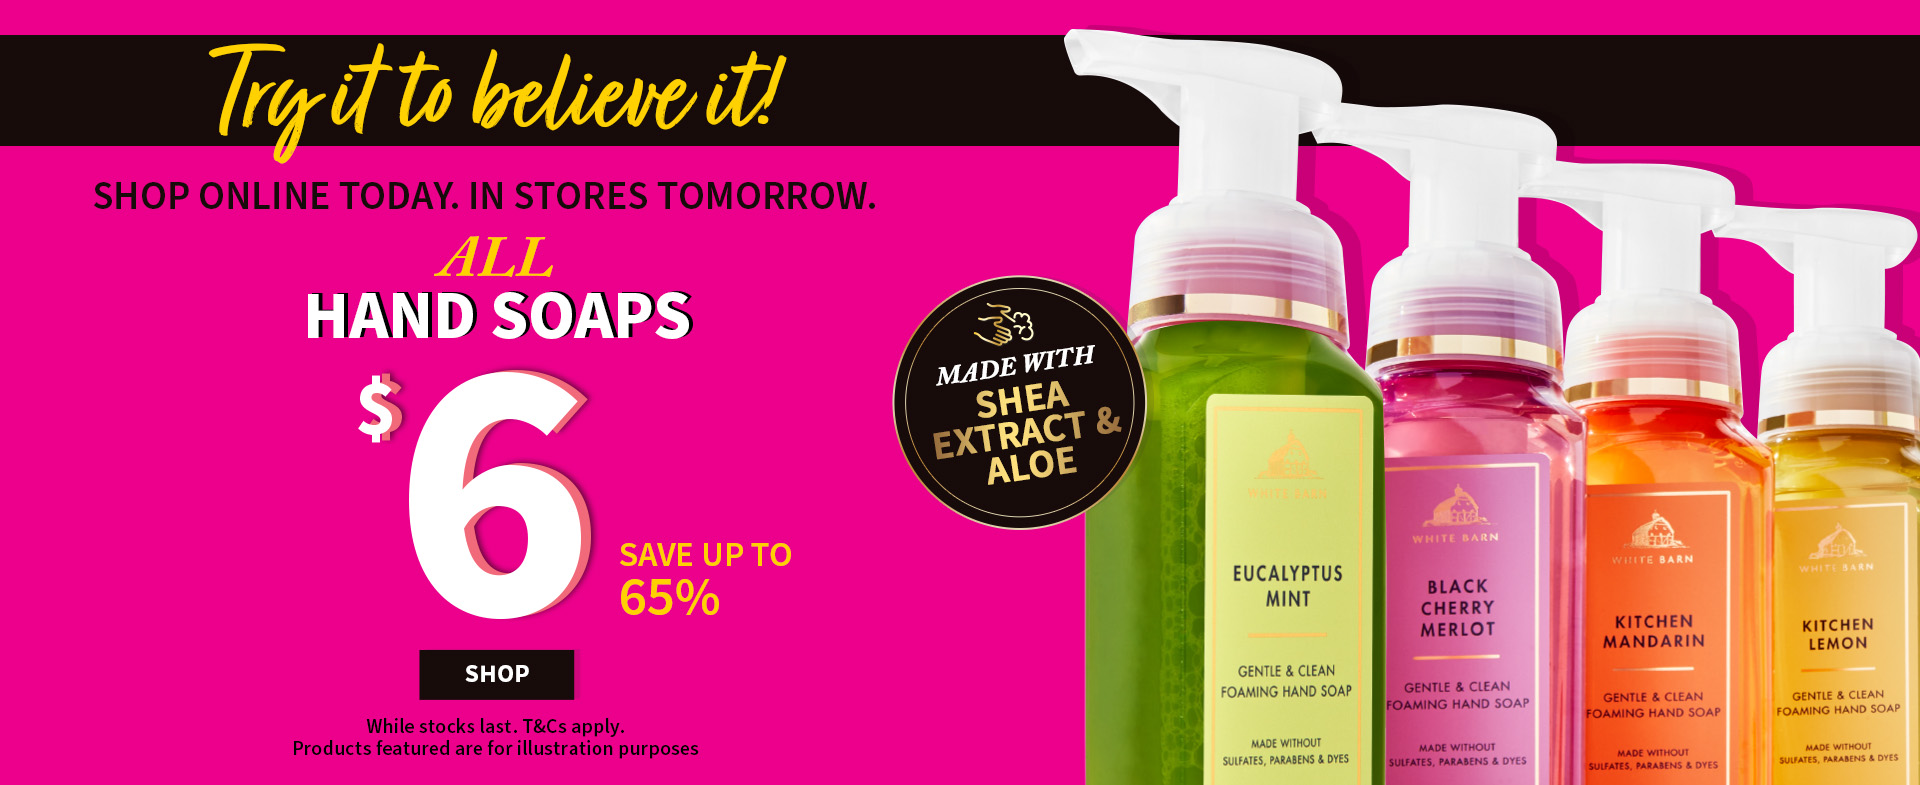 TRY IT TO BELIEVE IT SHOP ONLINE TODAY. IN STORE TOMORROW. ALL HAND SOAPS $